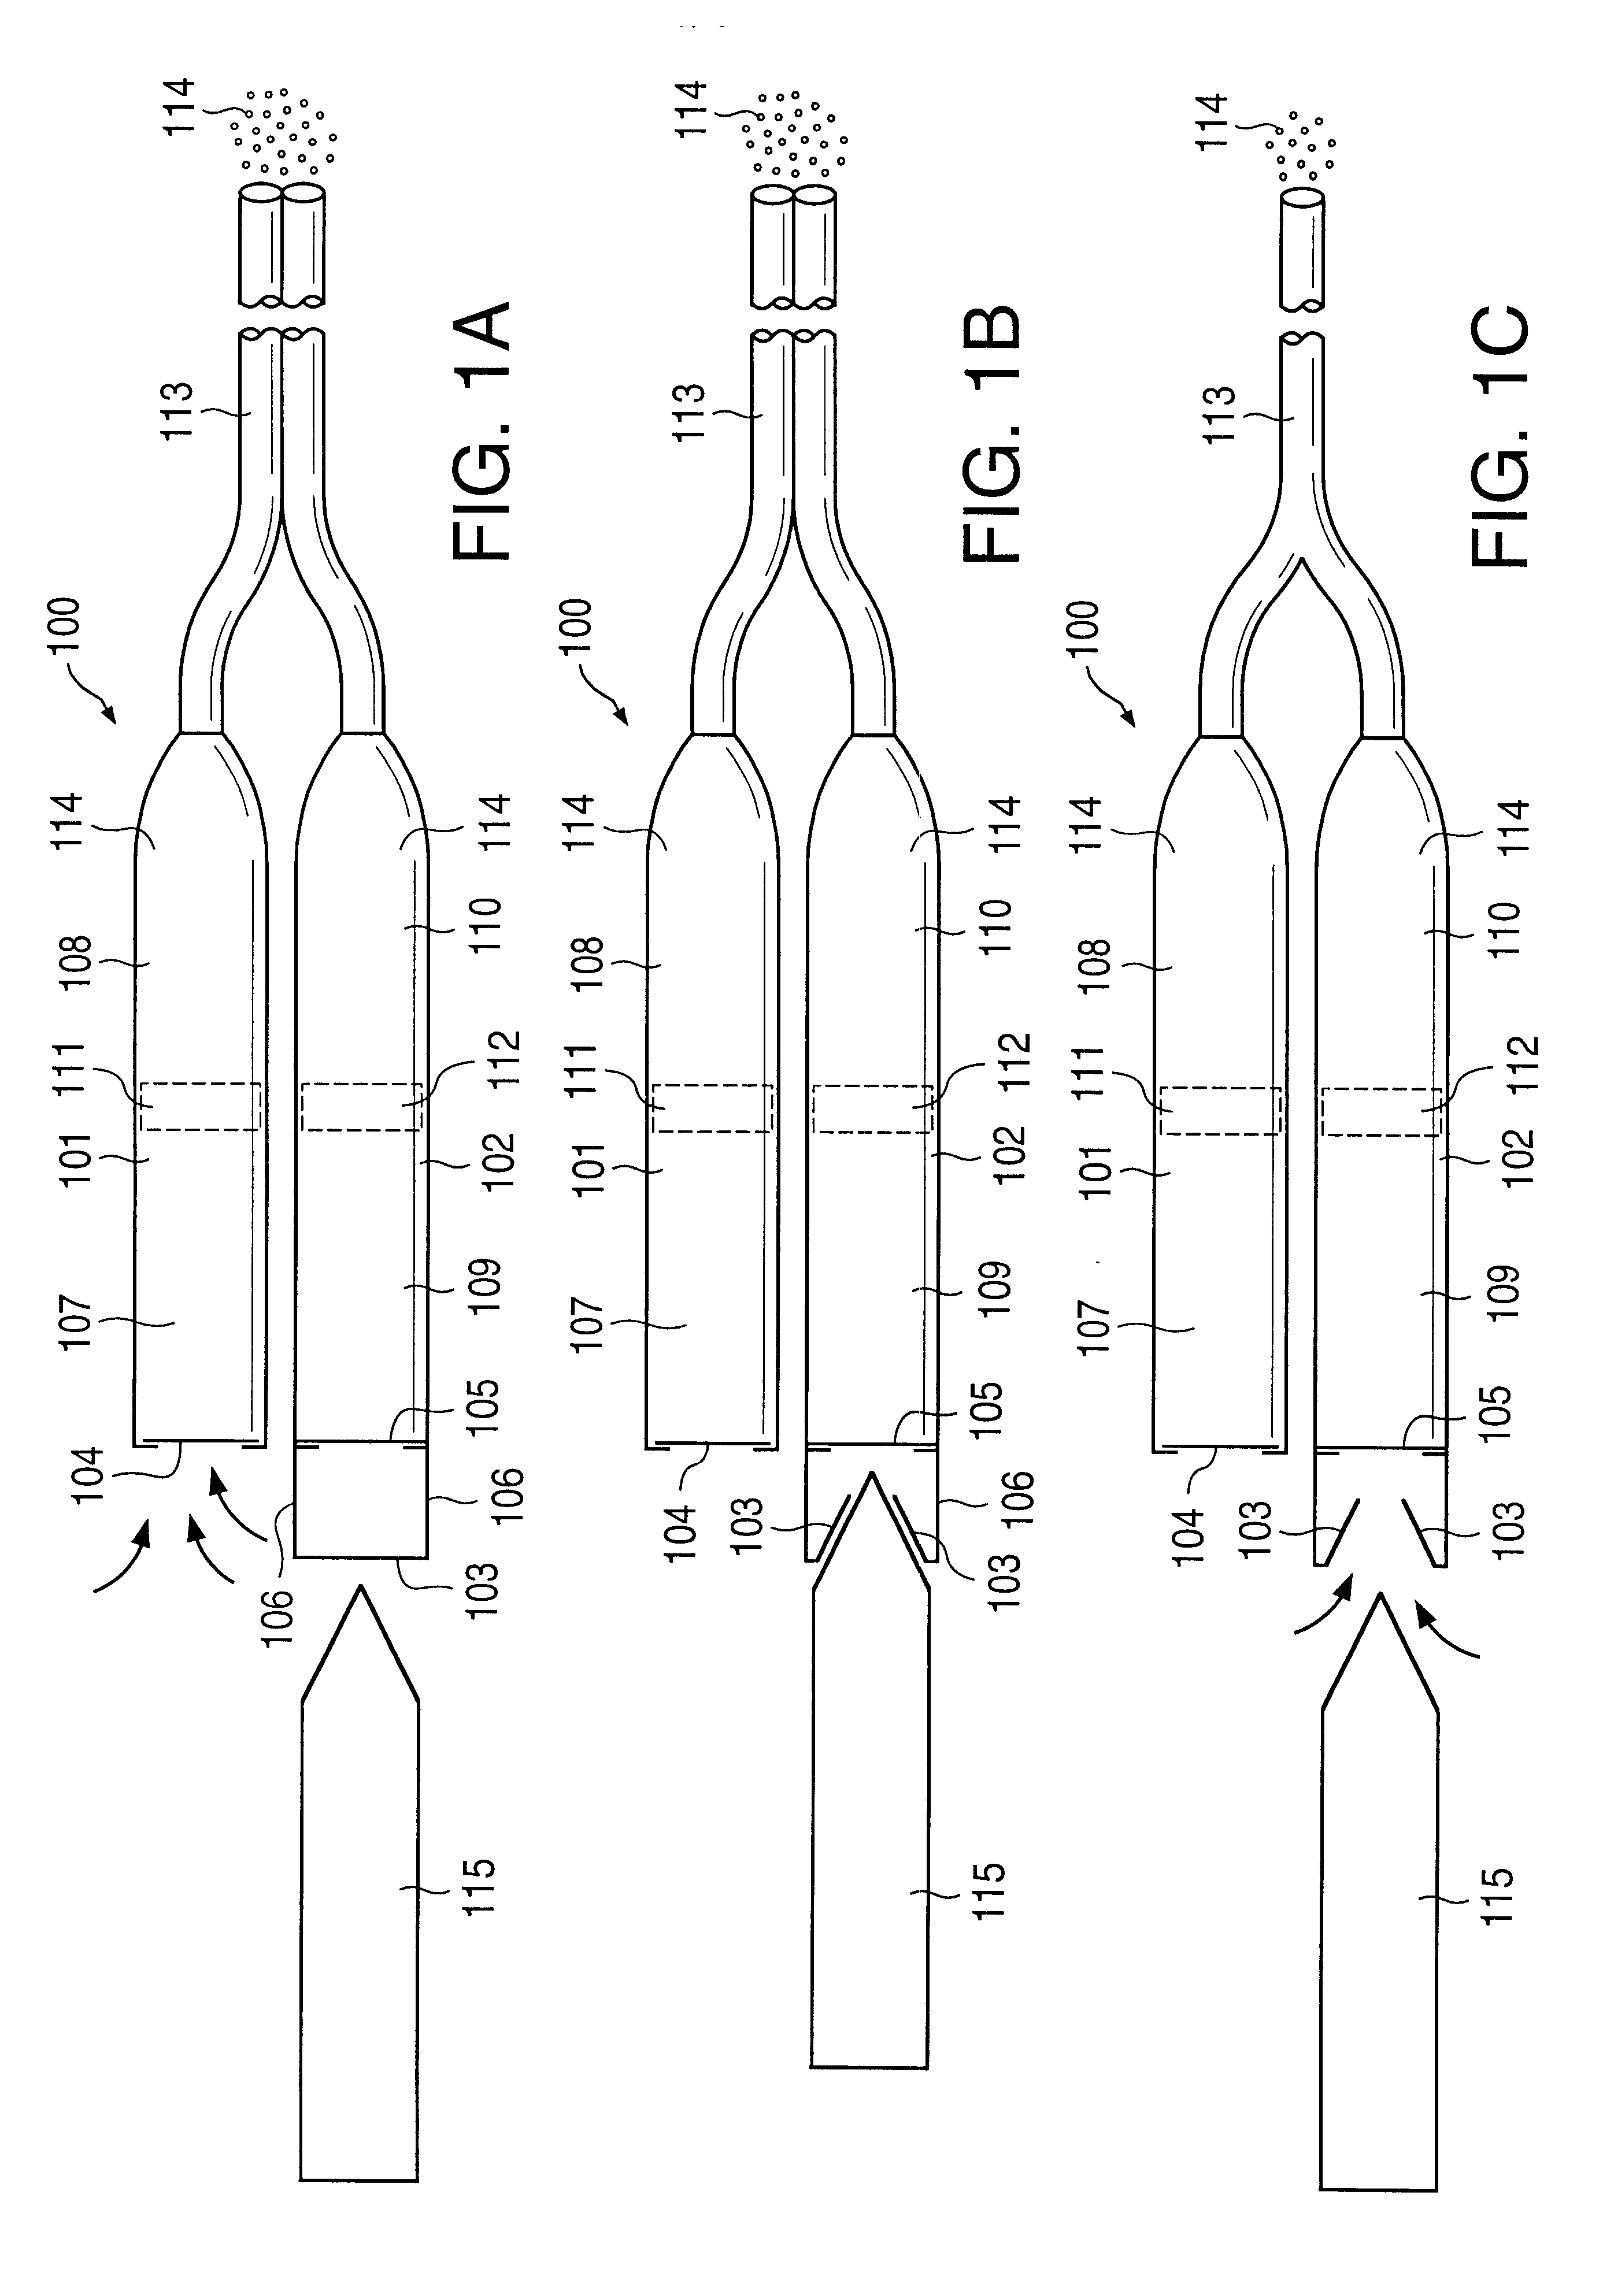 Osmotic pump drug delivery systems and methods